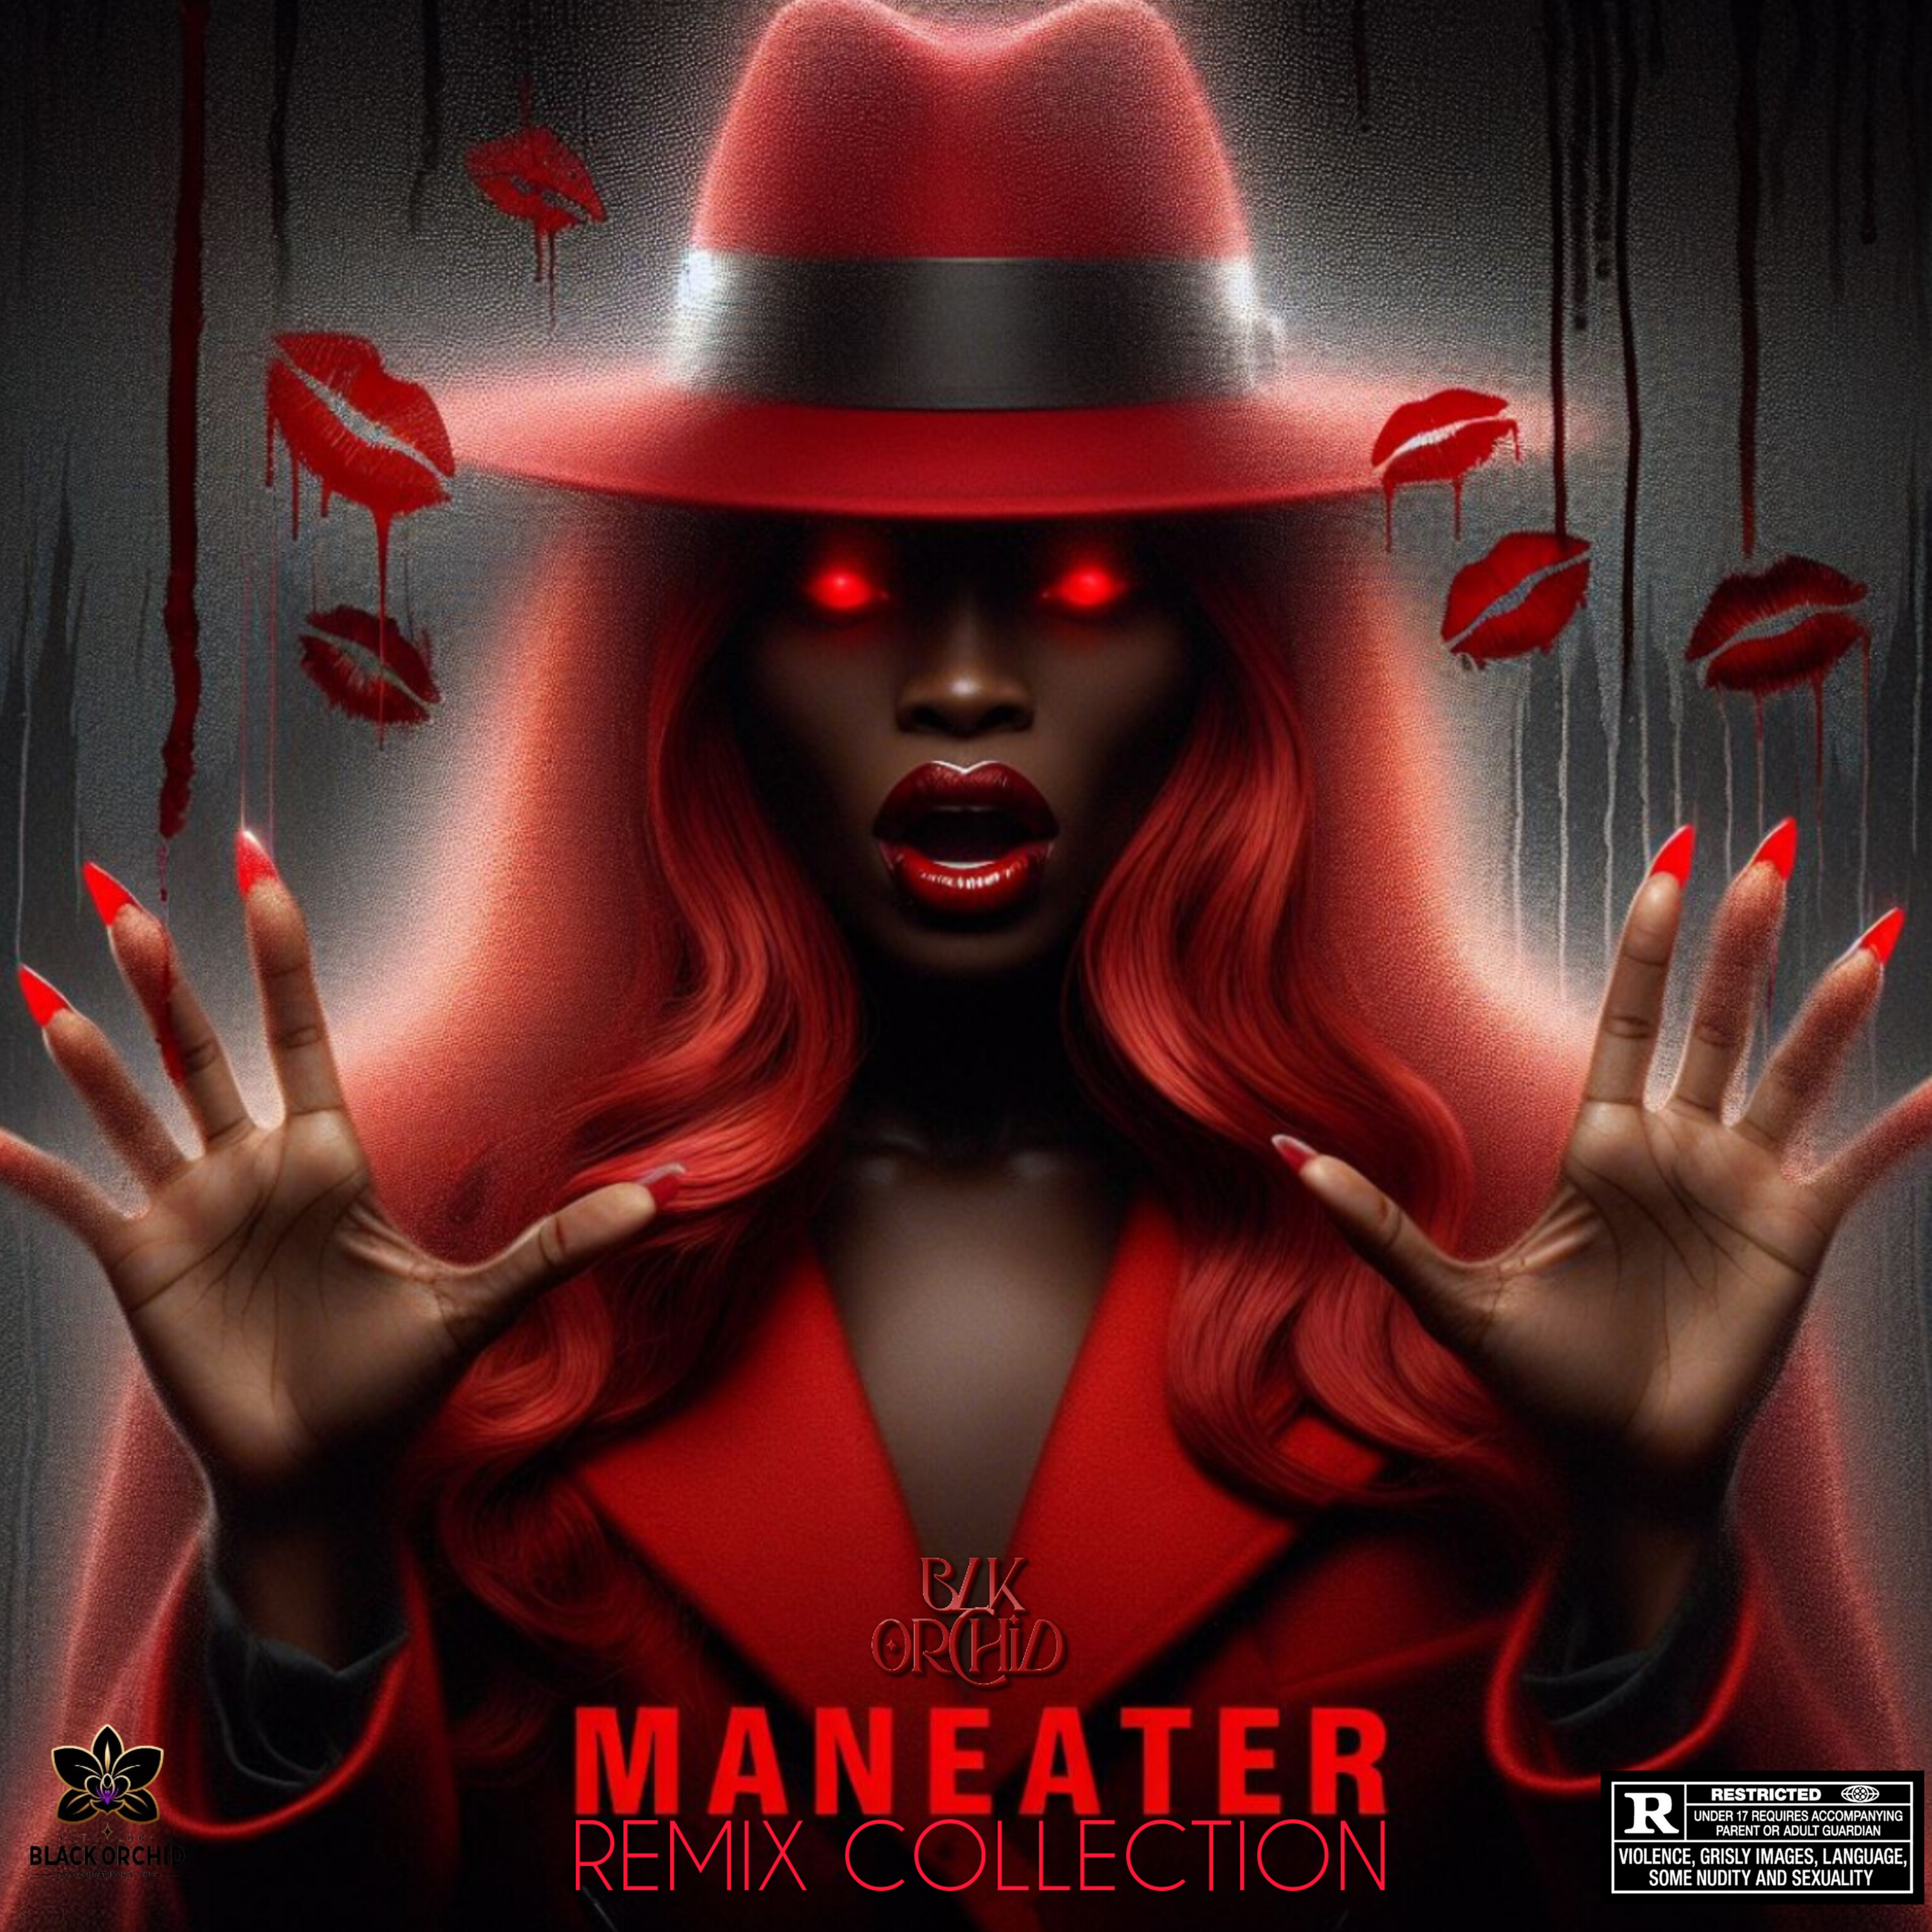 Maneater Remix Collection concept art